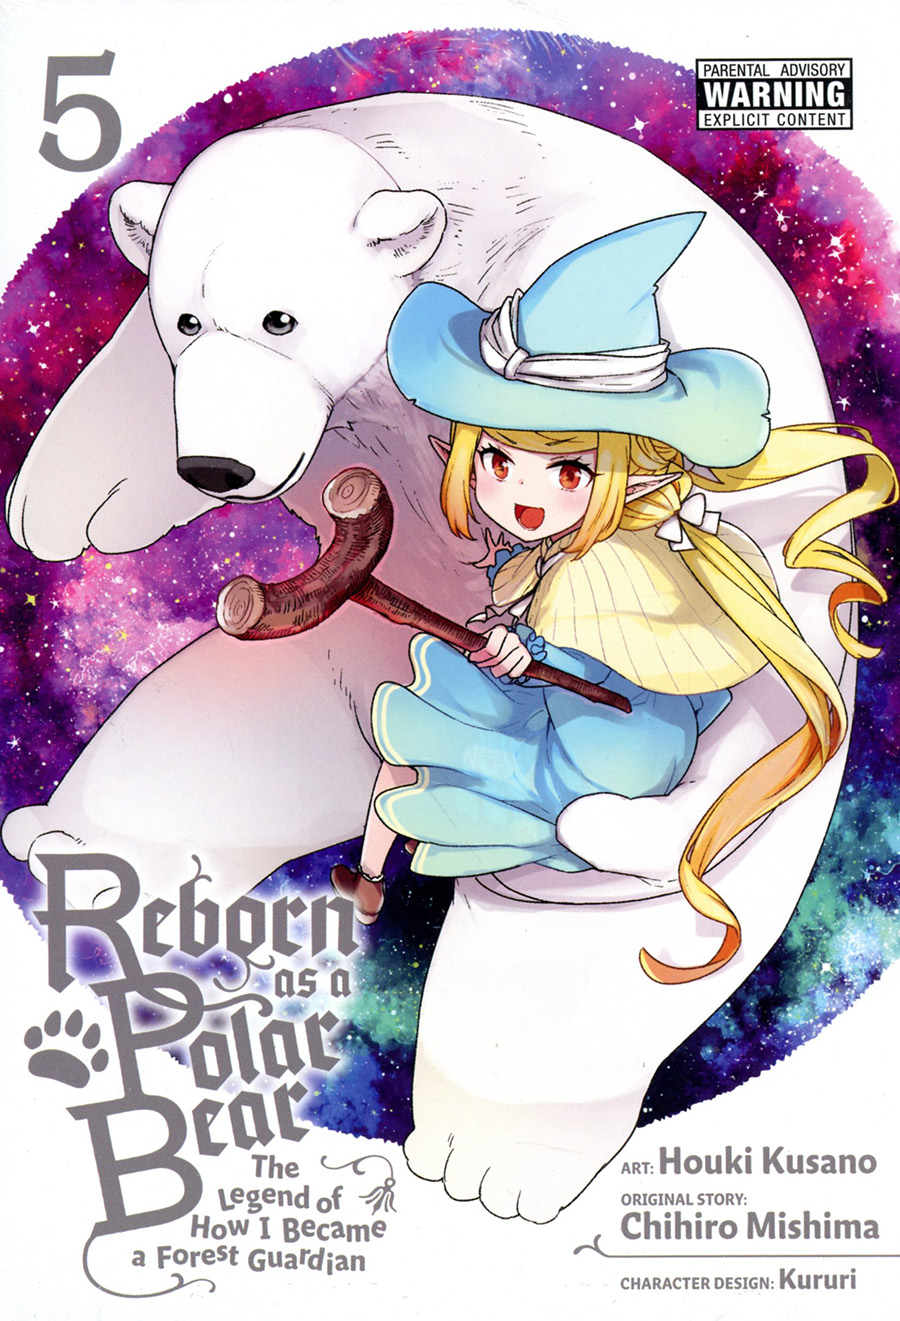 Reborn As A Polar Bear Legend Of How I Became A Forest Guardian Vol 5 GN